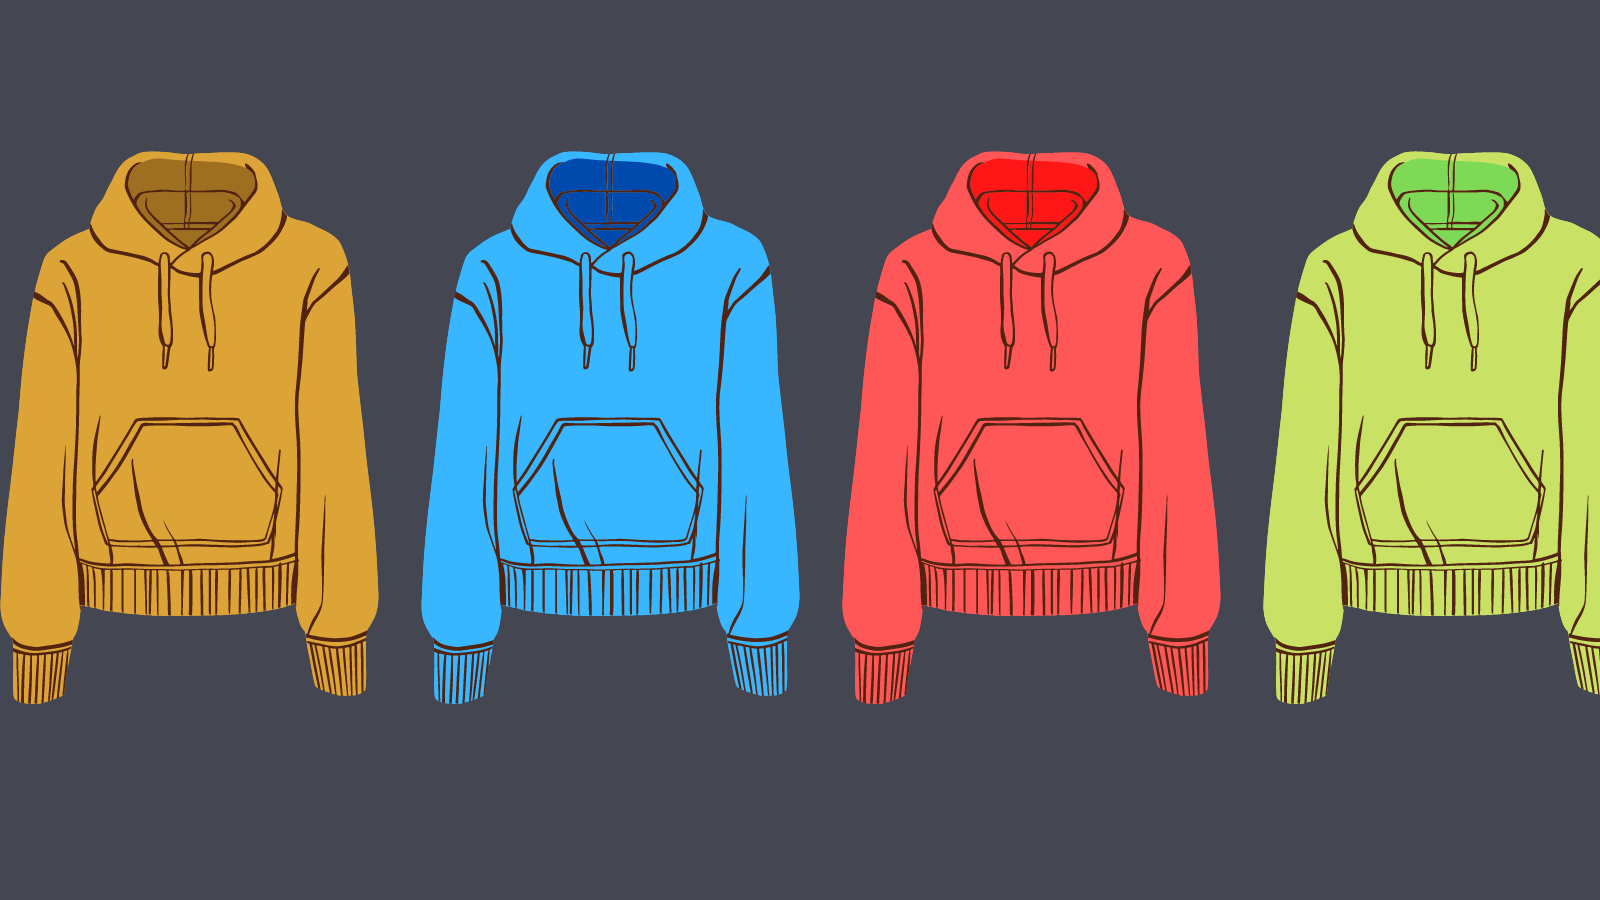 Four identical drawstring hoodies in different colors one yellow, one blue, one red, one green